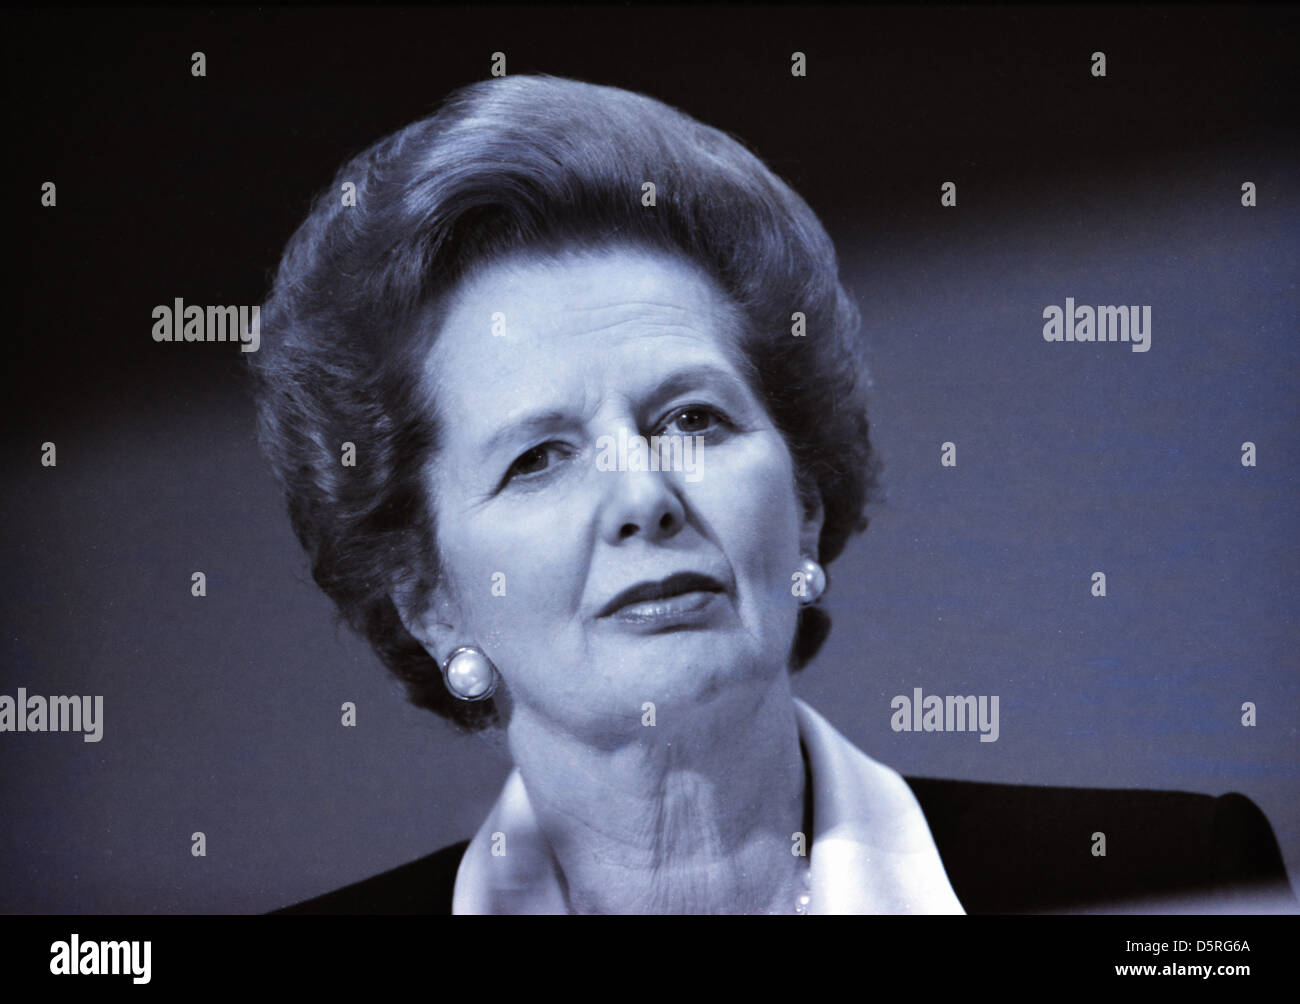 Archive: Margaret Thatcher . . 12.10.1989             Prime Minister Margaret (Maggie) Thatcher at the Conservative Party Conference in Blackpool. Pic: Paul Marriott Photography/Alamy Live News Stock Photo